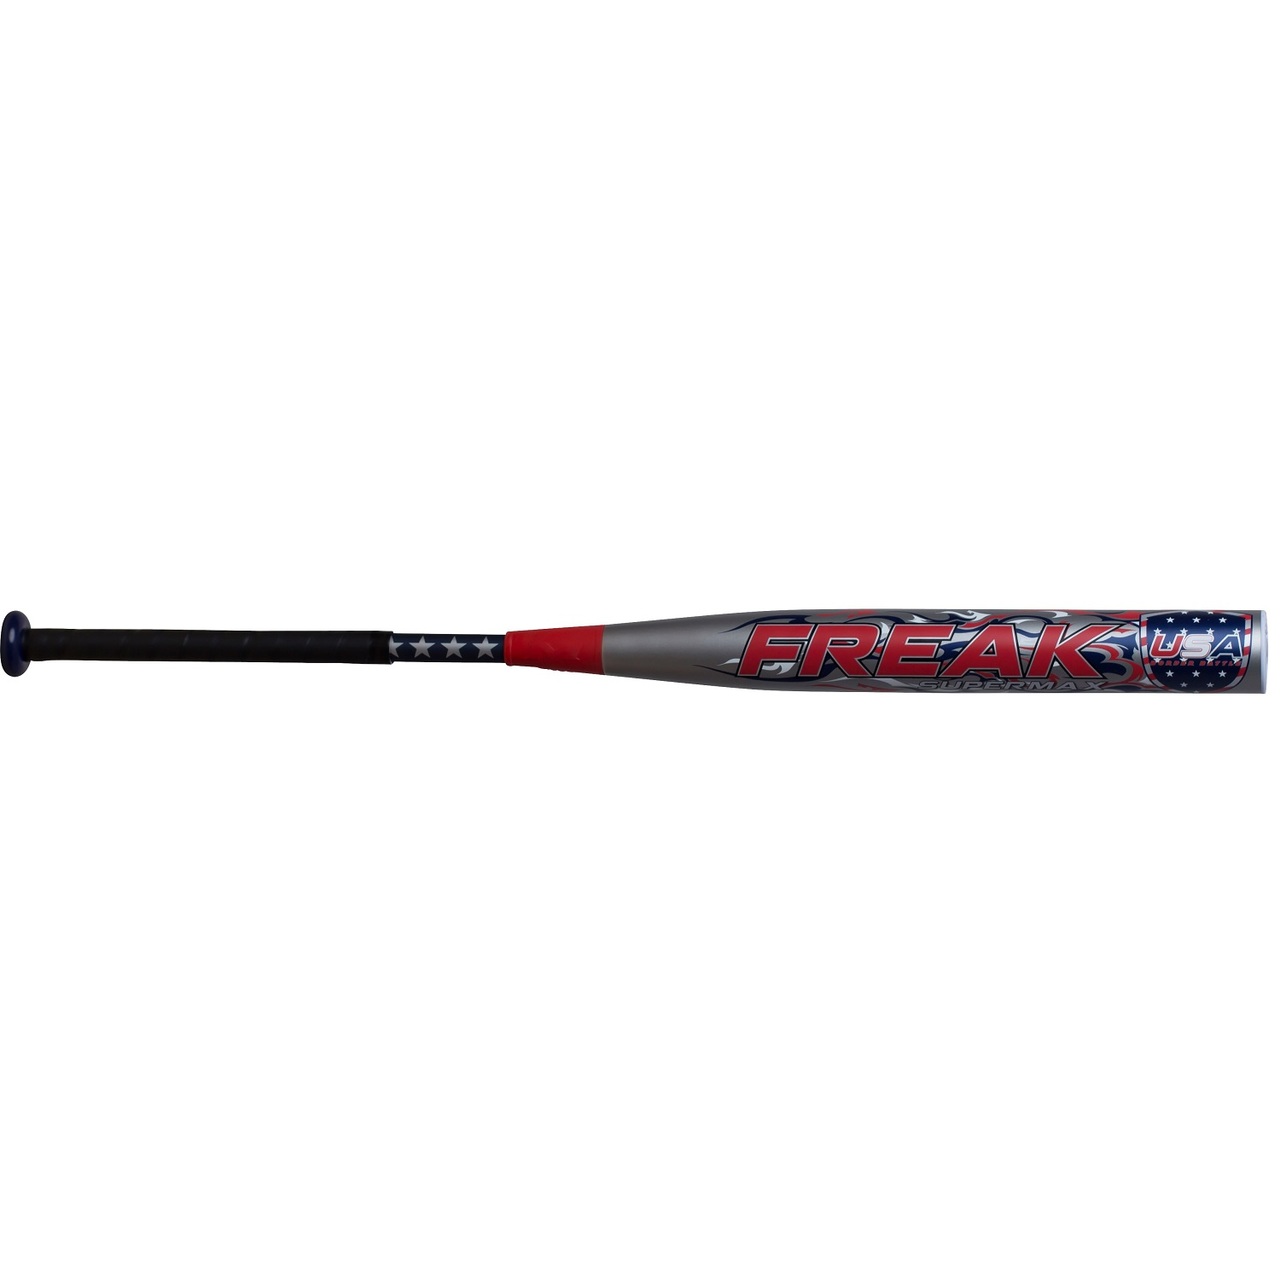 miken-freak-usa-supermax-asa-mbbf4a-slowpitch-softball-bat-34-inch-27-oz MBBF4A-3-27 Miken 658925039478 Numbered Limited Edition - Only 1000 made Four-Piece 100% Composite Construction